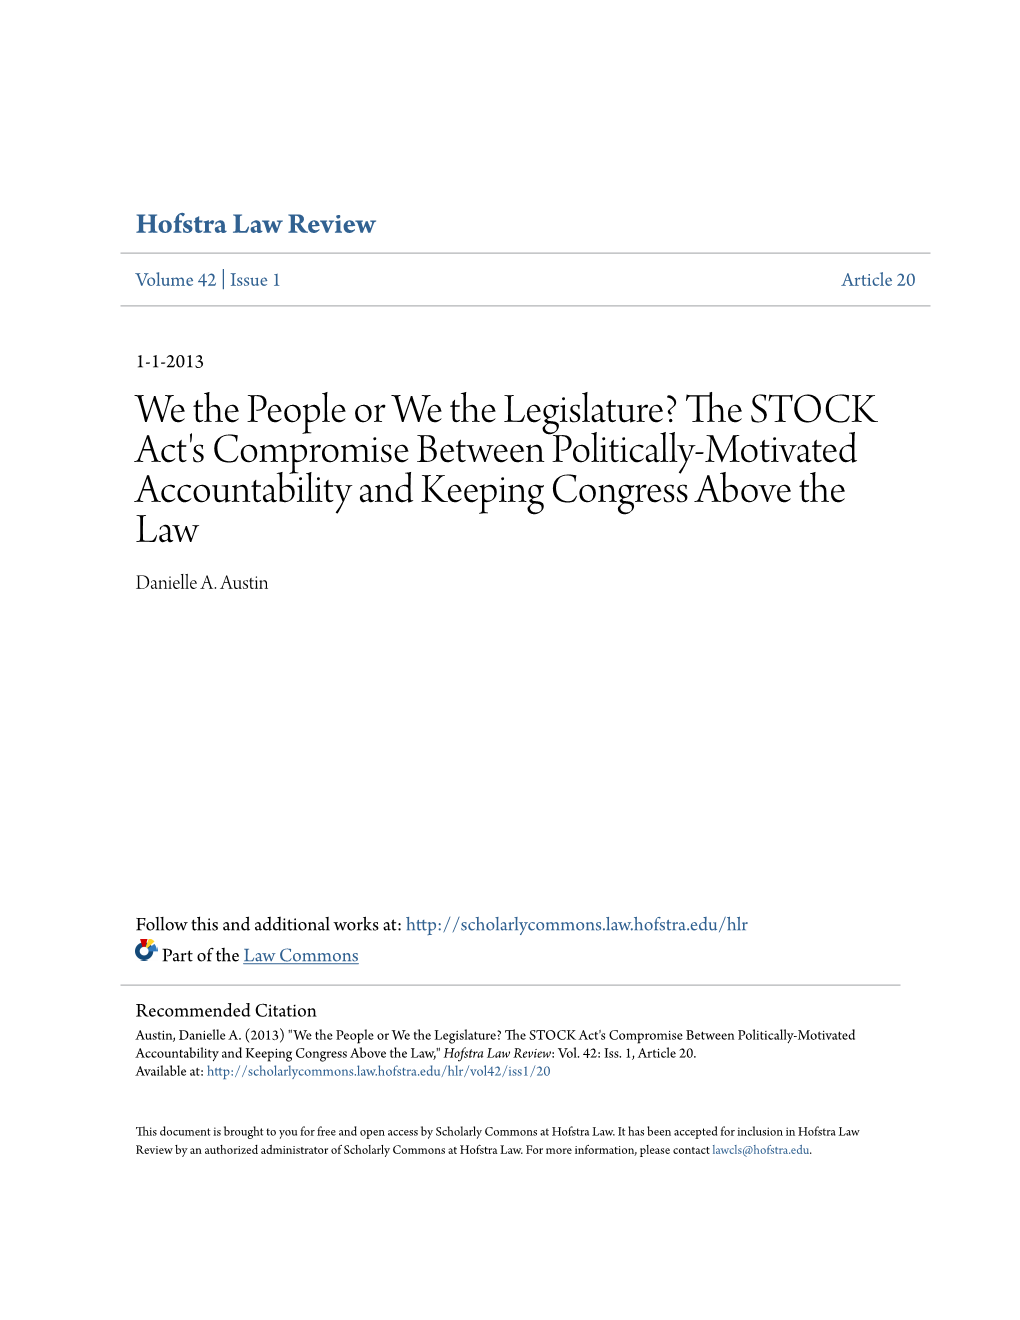 We the People Or We the Legislature? the STOCK Act's Compromise B